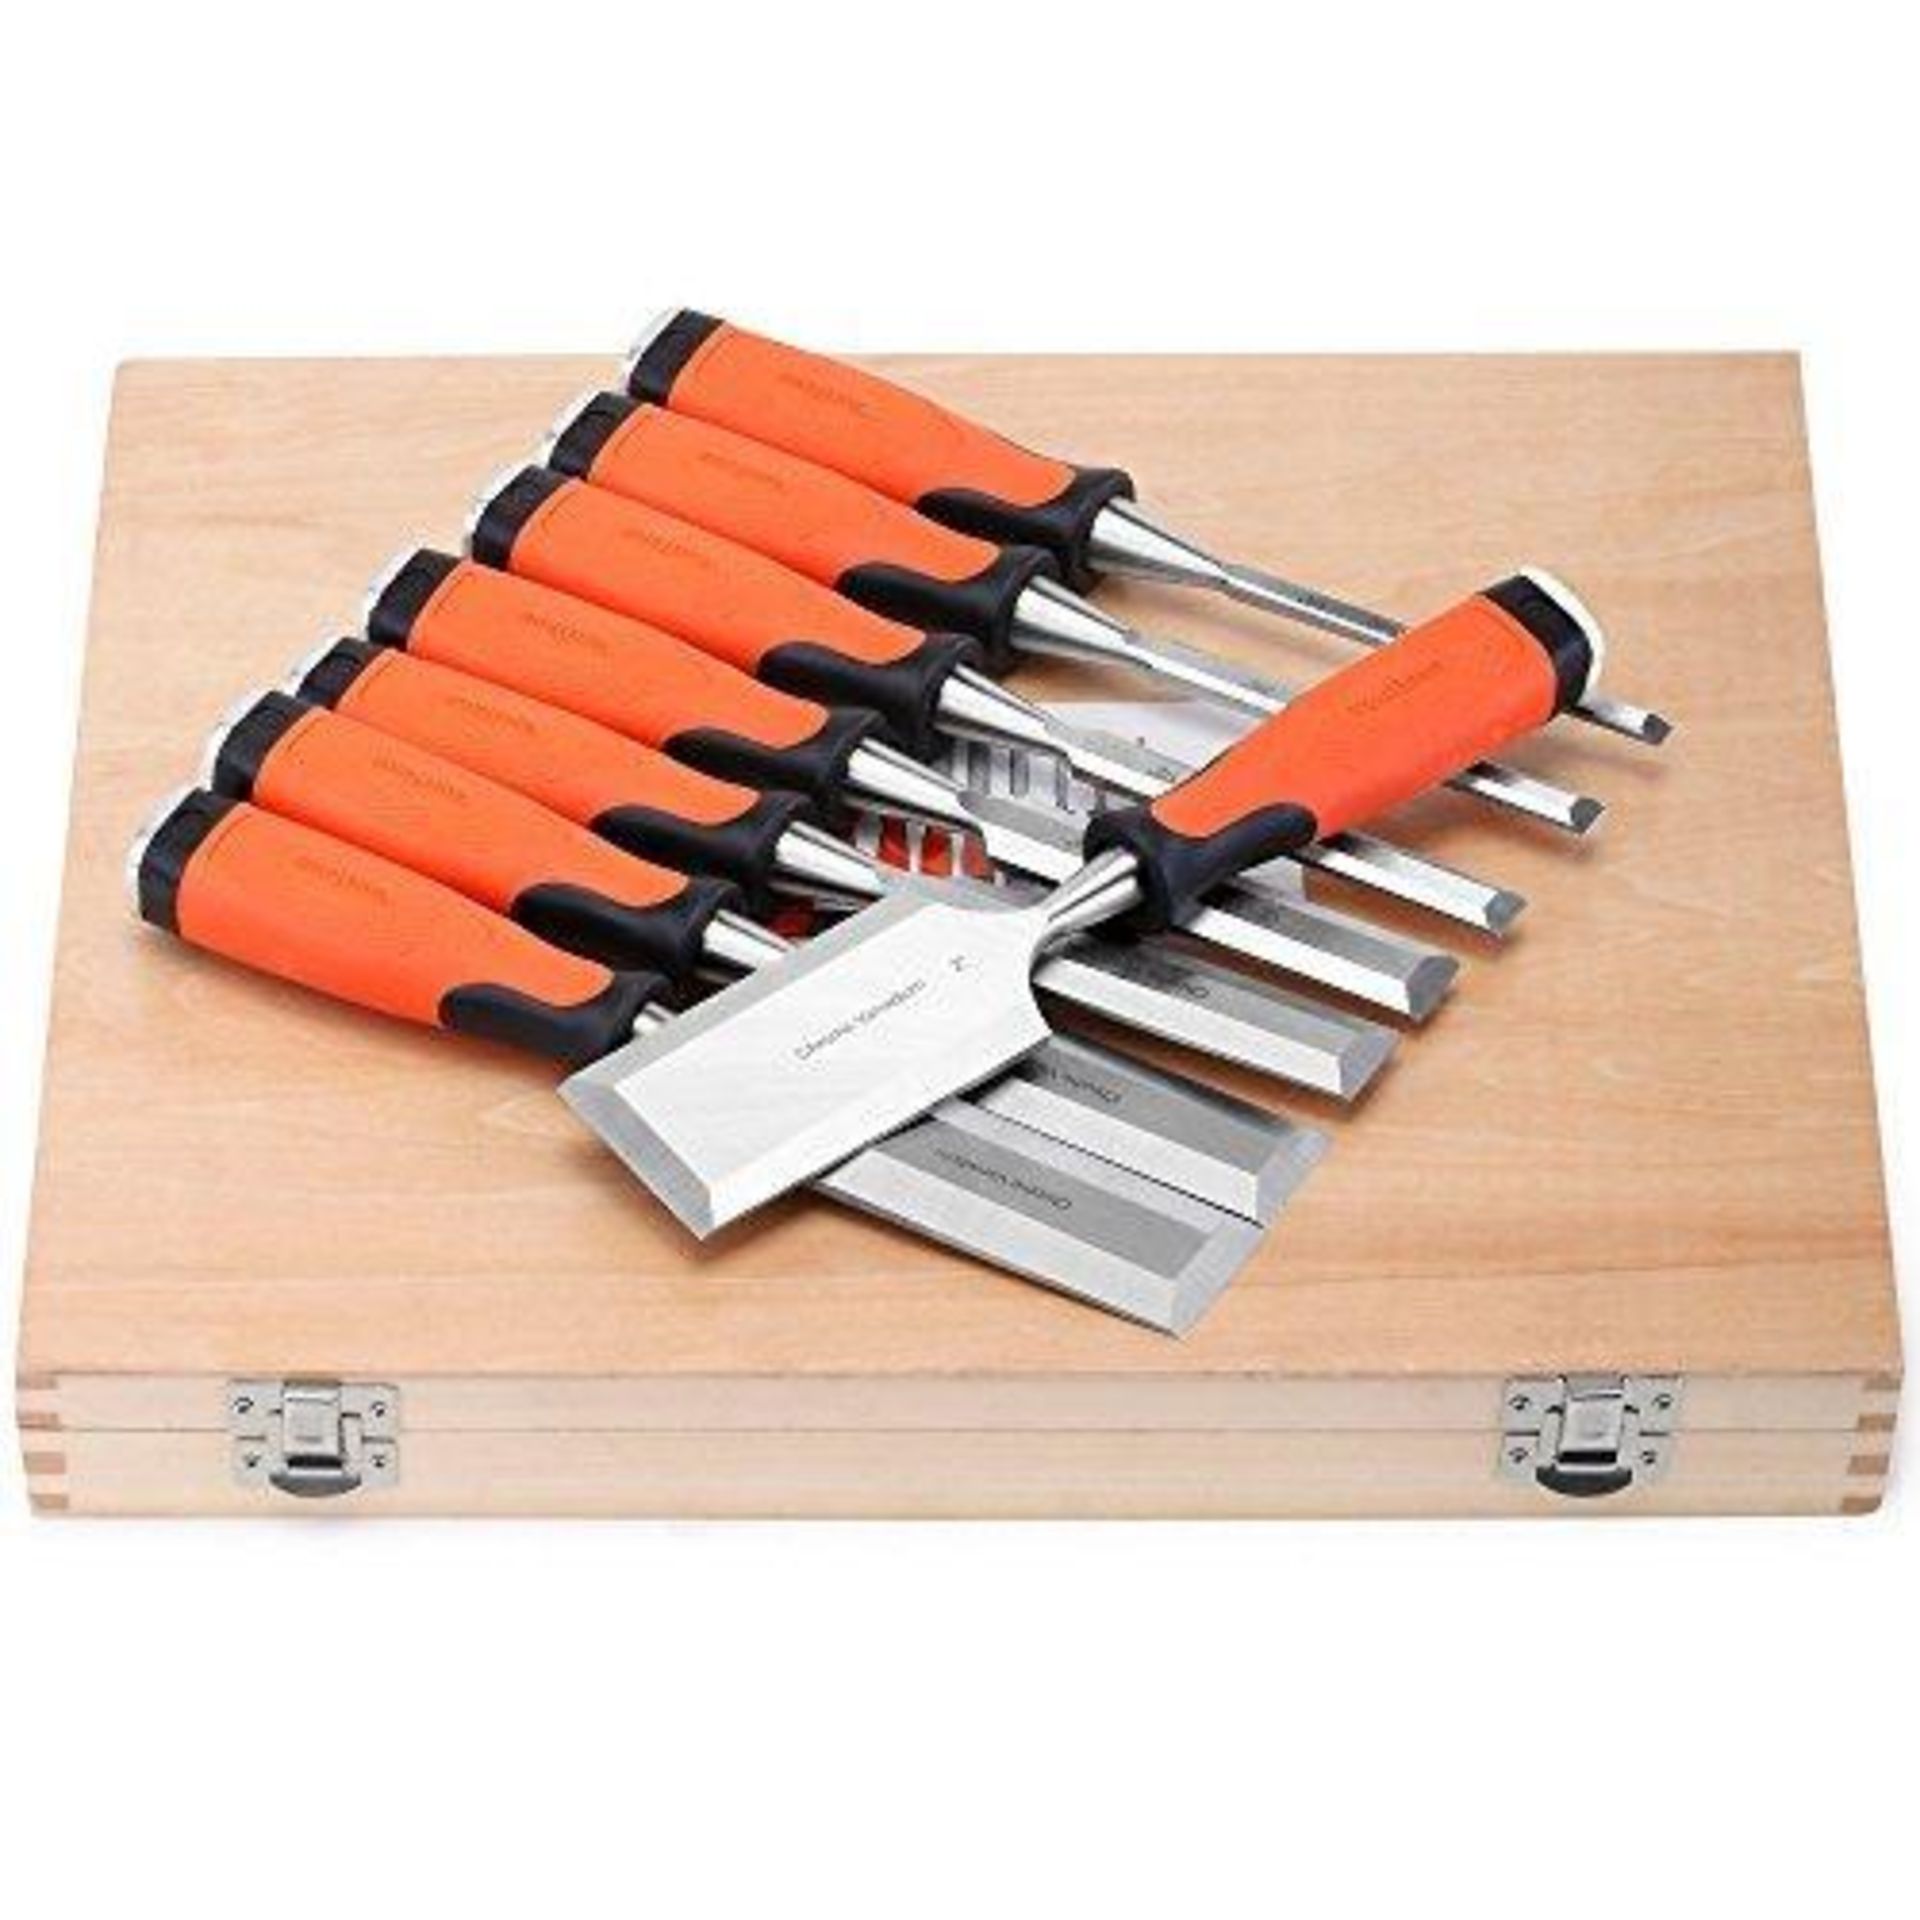 10pc Wood Chisel Set - ER51.Luxury 10pc Wood Chisel SetThis Luxury Chisel Set is just the job for - Image 3 of 5